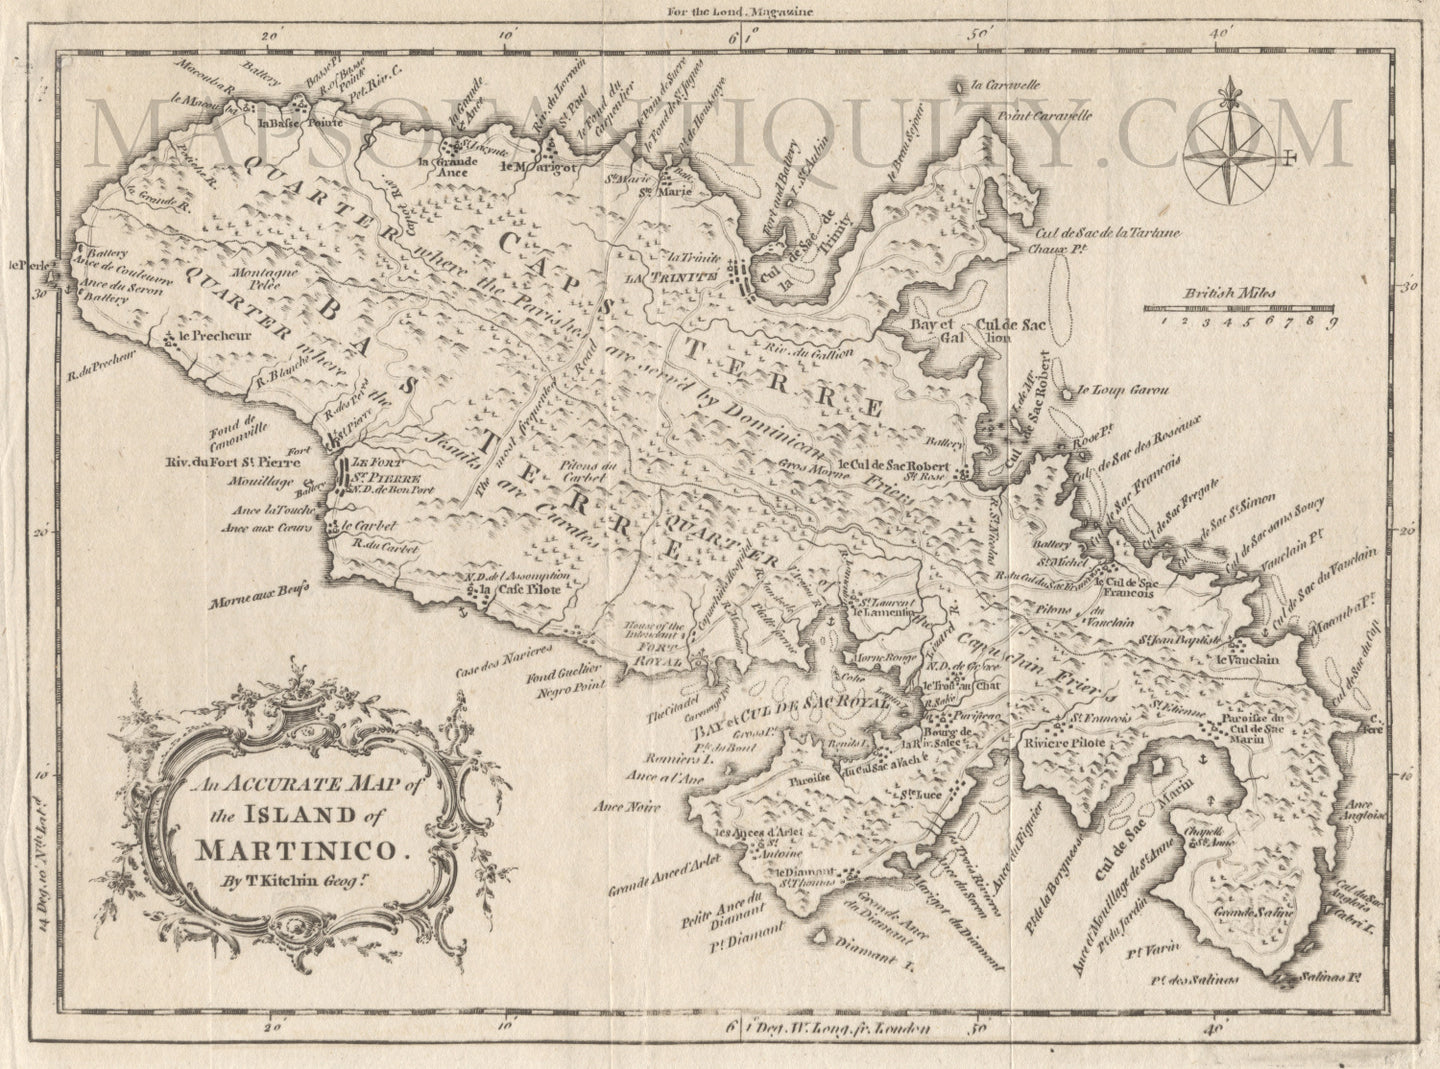 Black-and-white-antique-map-An-Accurate-Map-of-the-Island-of-Martinico-******-Caribbean-Martinique-1758-Thomas-Kitchin-Maps-Of-Antiquity